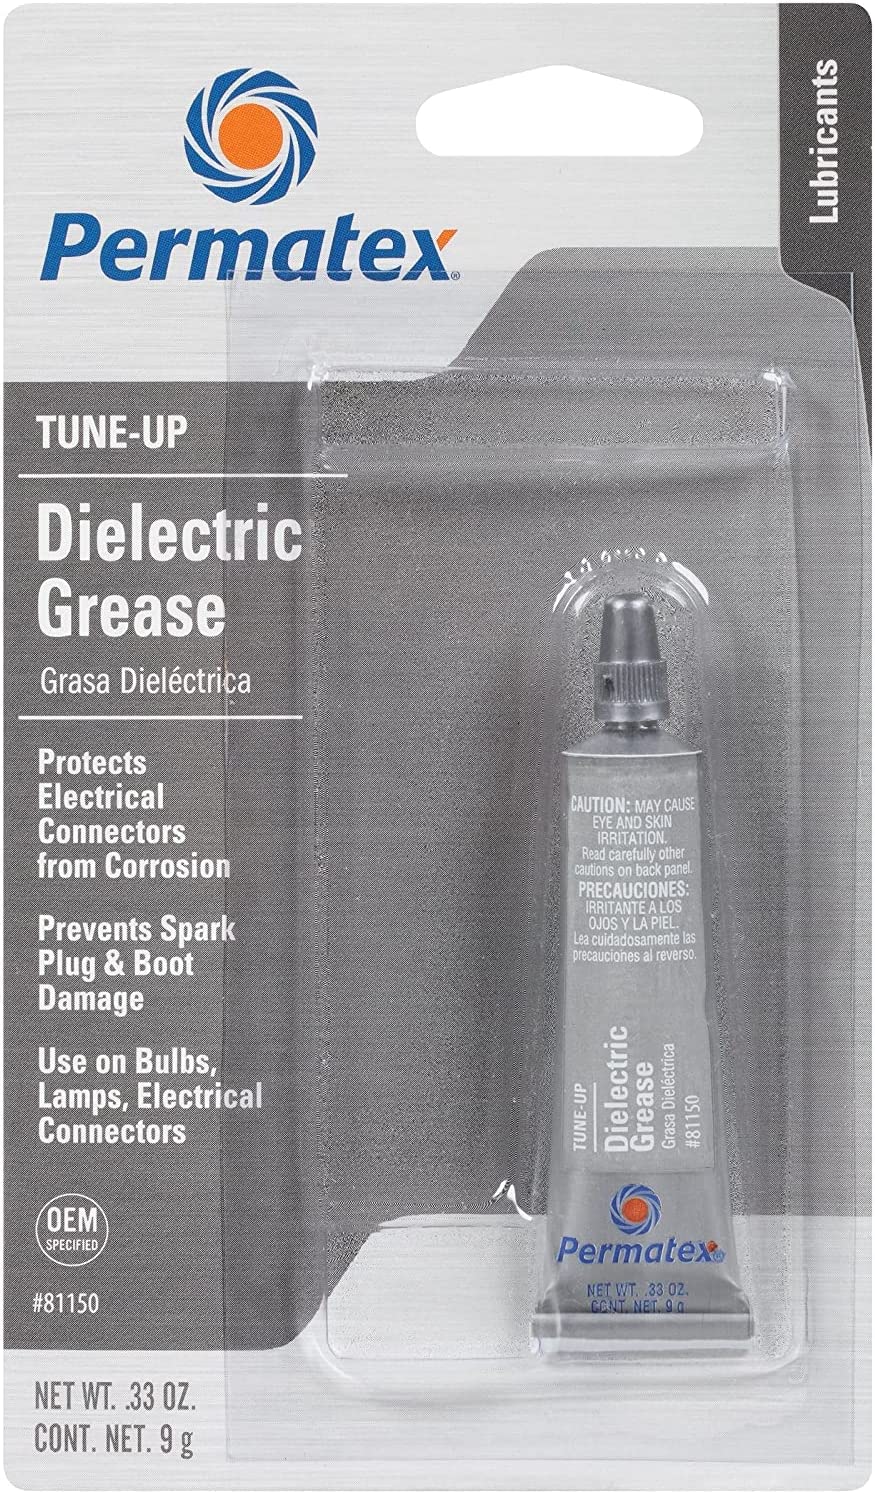 Permatex 81150-6PK Dielectric Tune-Up Grease, 0.33 oz. (Pack of 6)